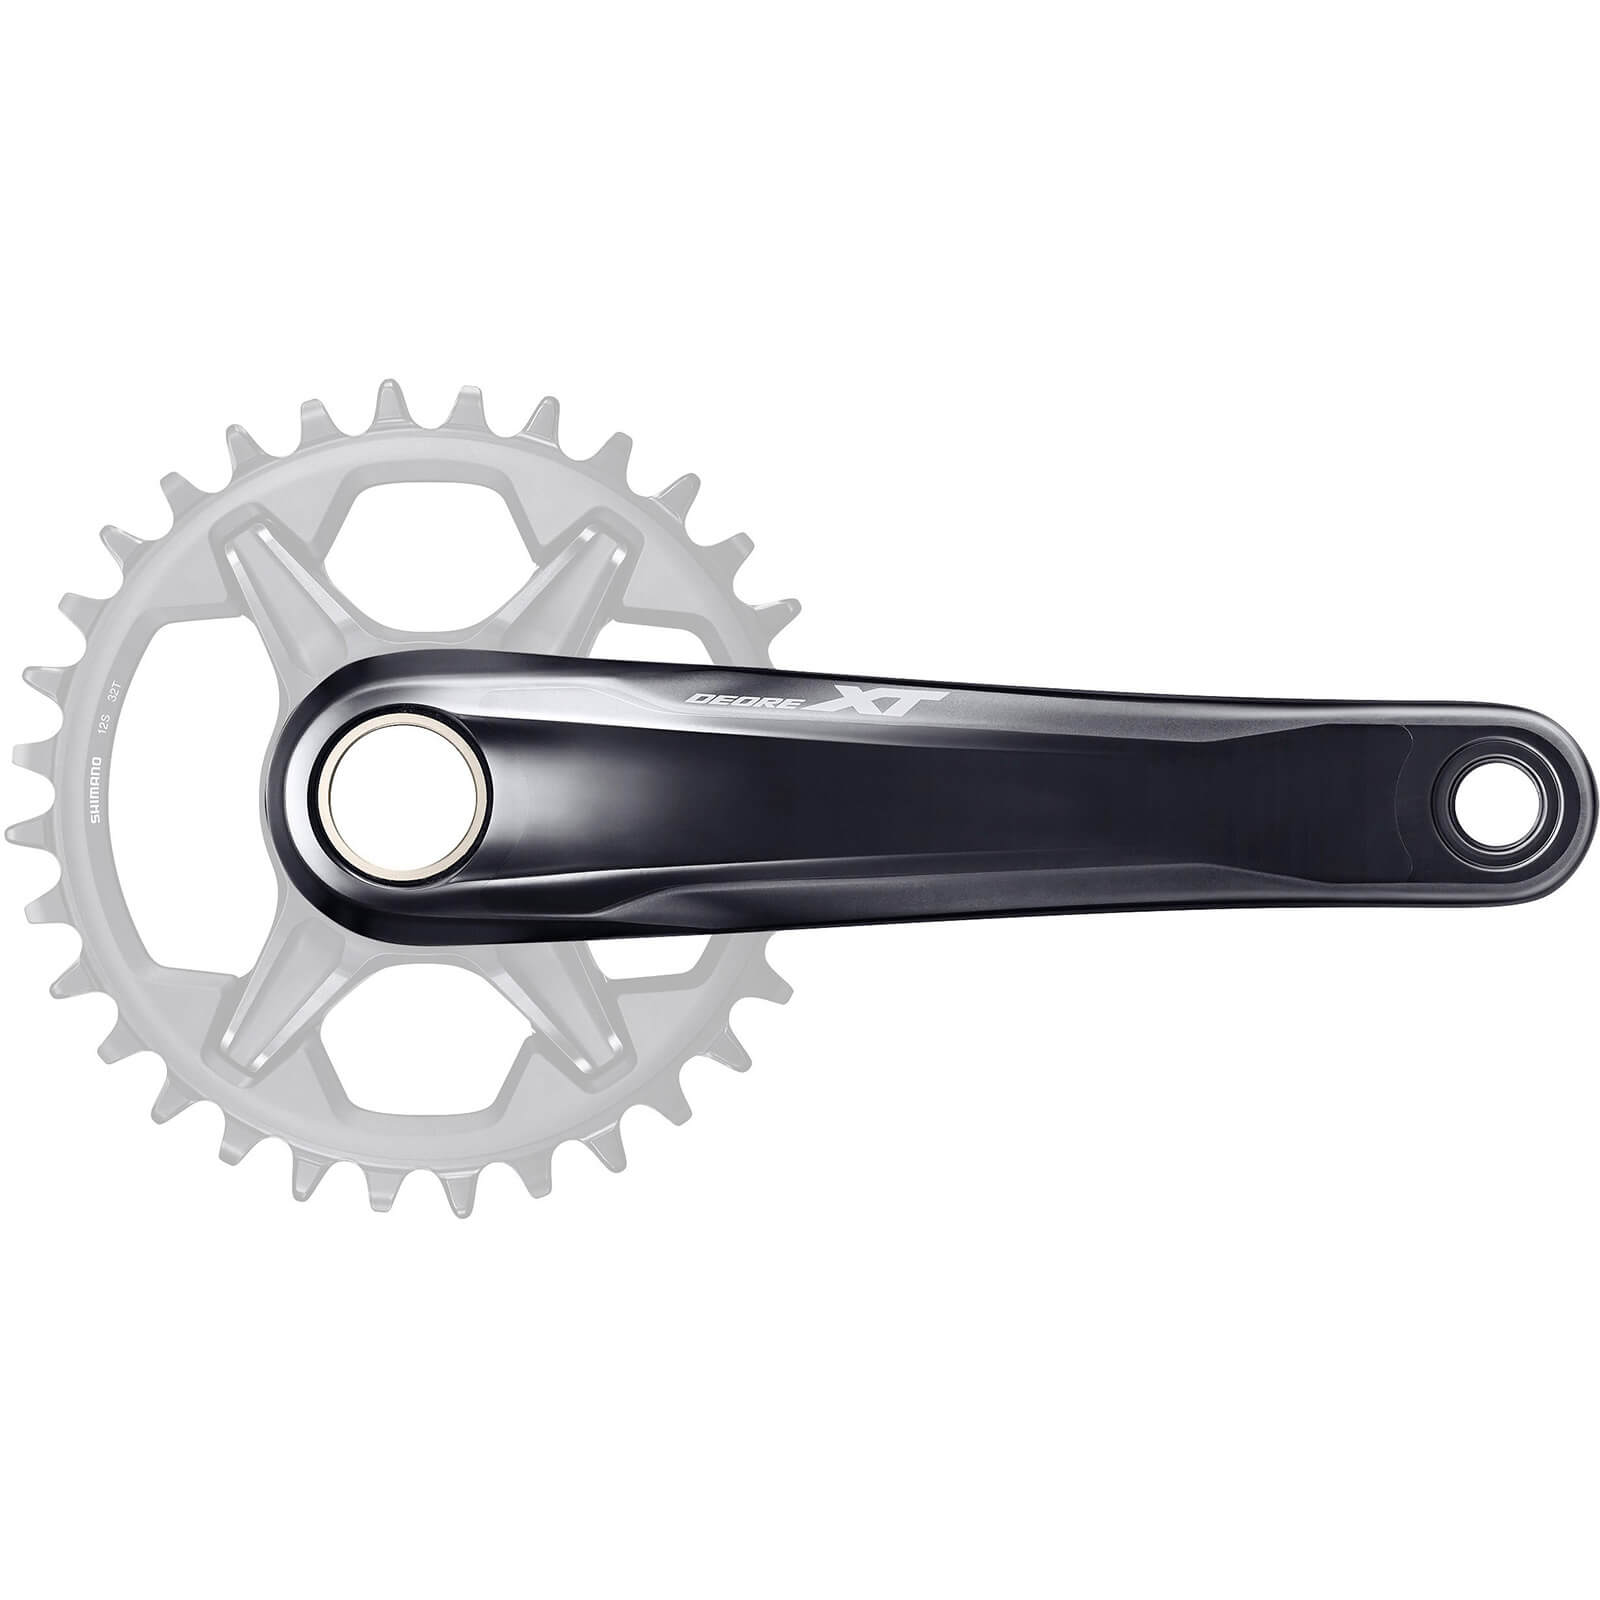 Shimano Deore XT M8100 Crankset without Chainring - 175mm